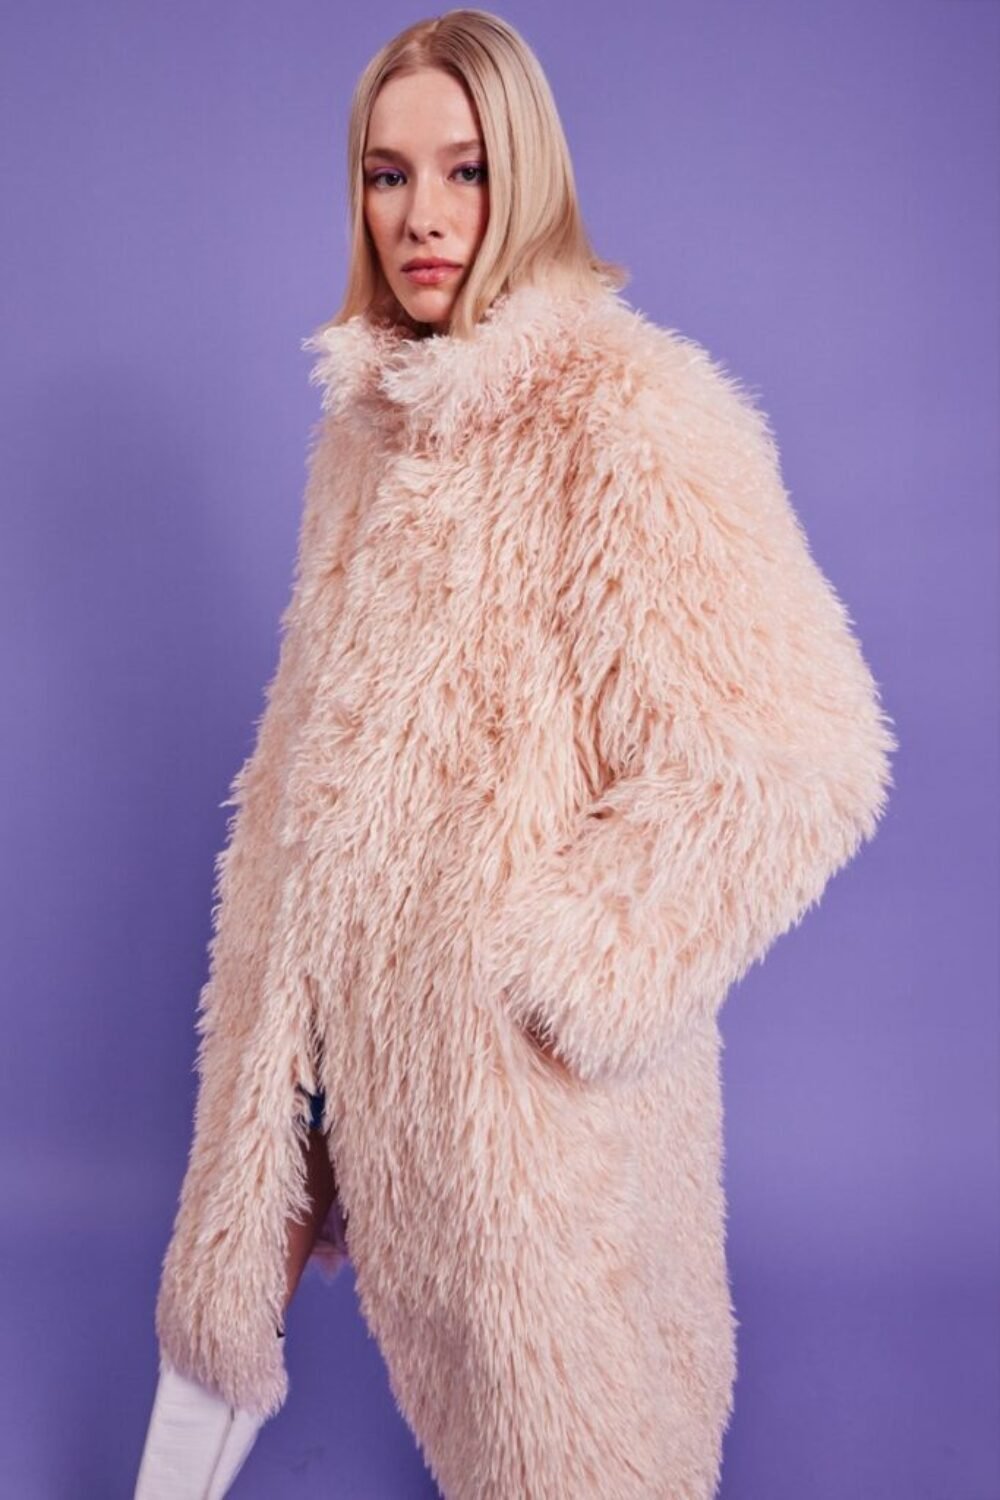 Shop Lux Bamboo Blend Faux Fur Shearling Mongolian Coat and women's luxury and designer clothes at www.lux-apparel.co.uk